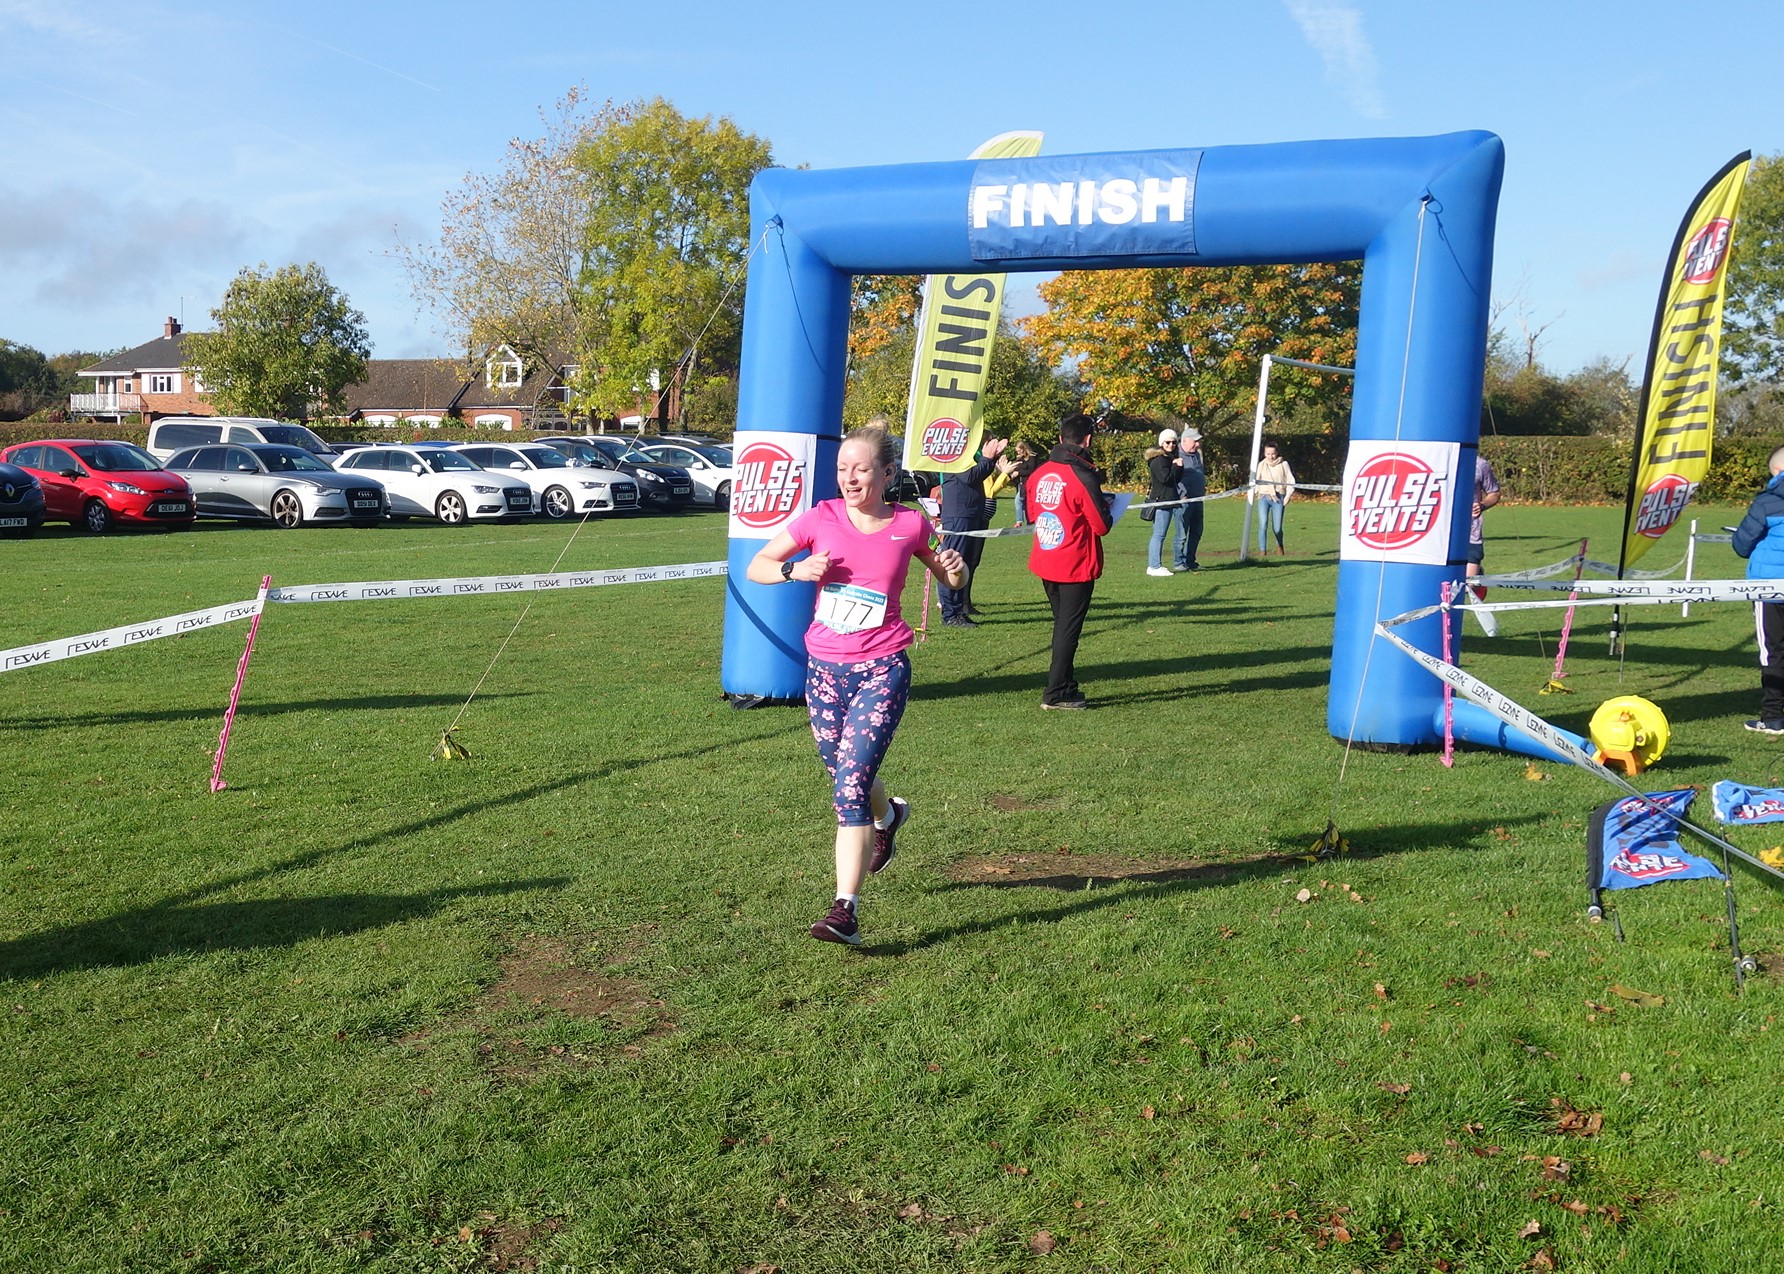 A runner crosses the finish line of the Cupcake Chase. Behind her is a large, inflatable blue arch with the word 'finish' emblazoned on it.